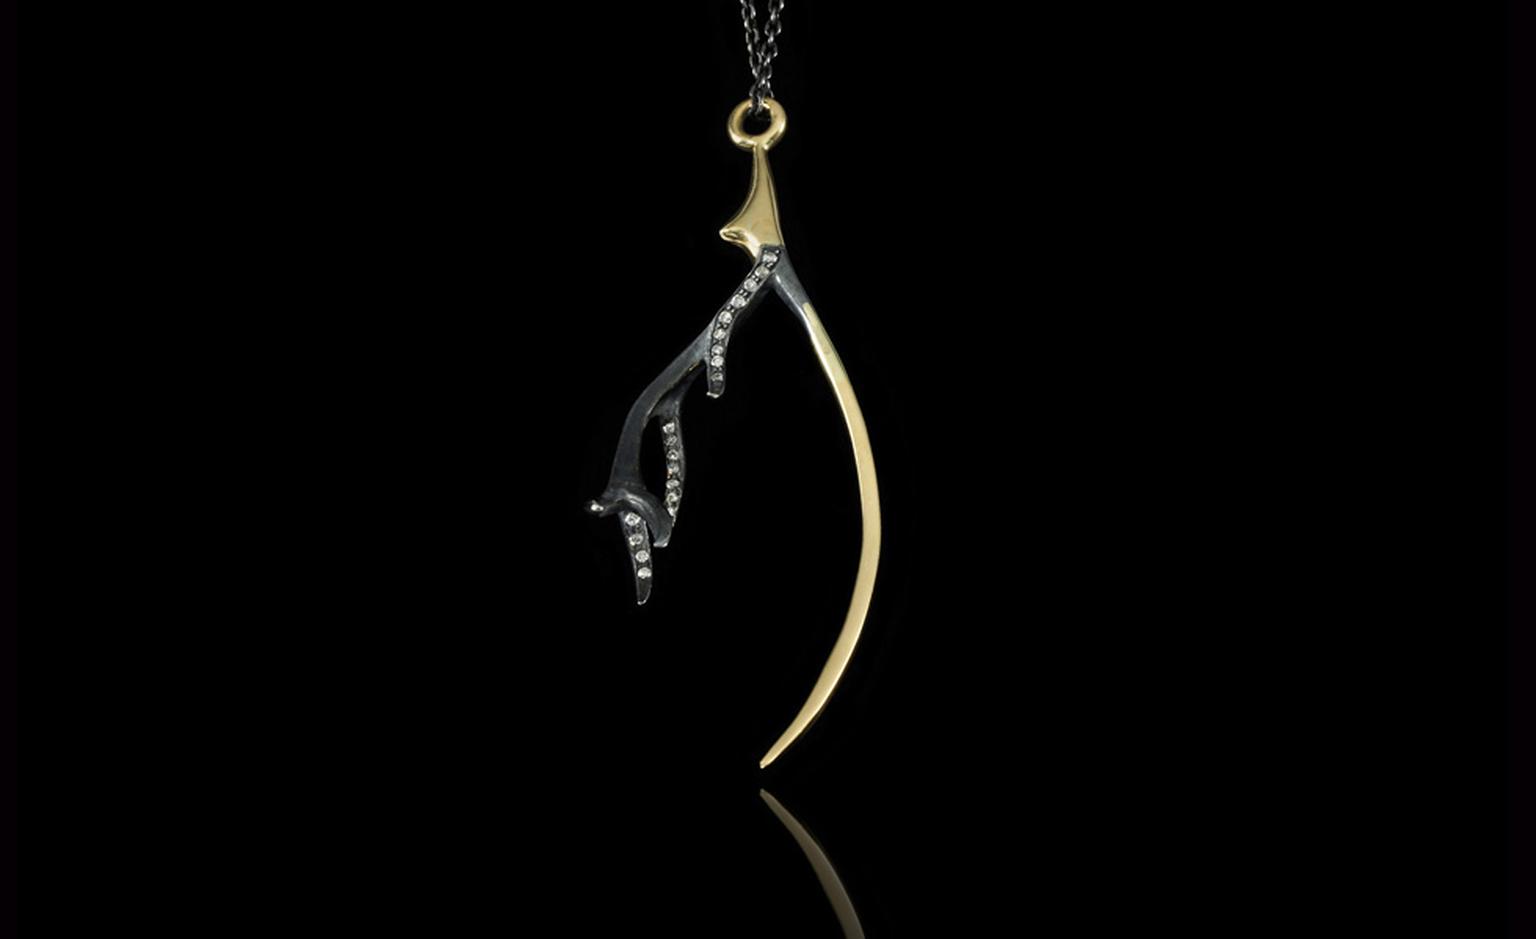 Jessica McCormack, 'Greed' diamond, 18k yellow gold and silver pendant, from the XIV collection. £2,500